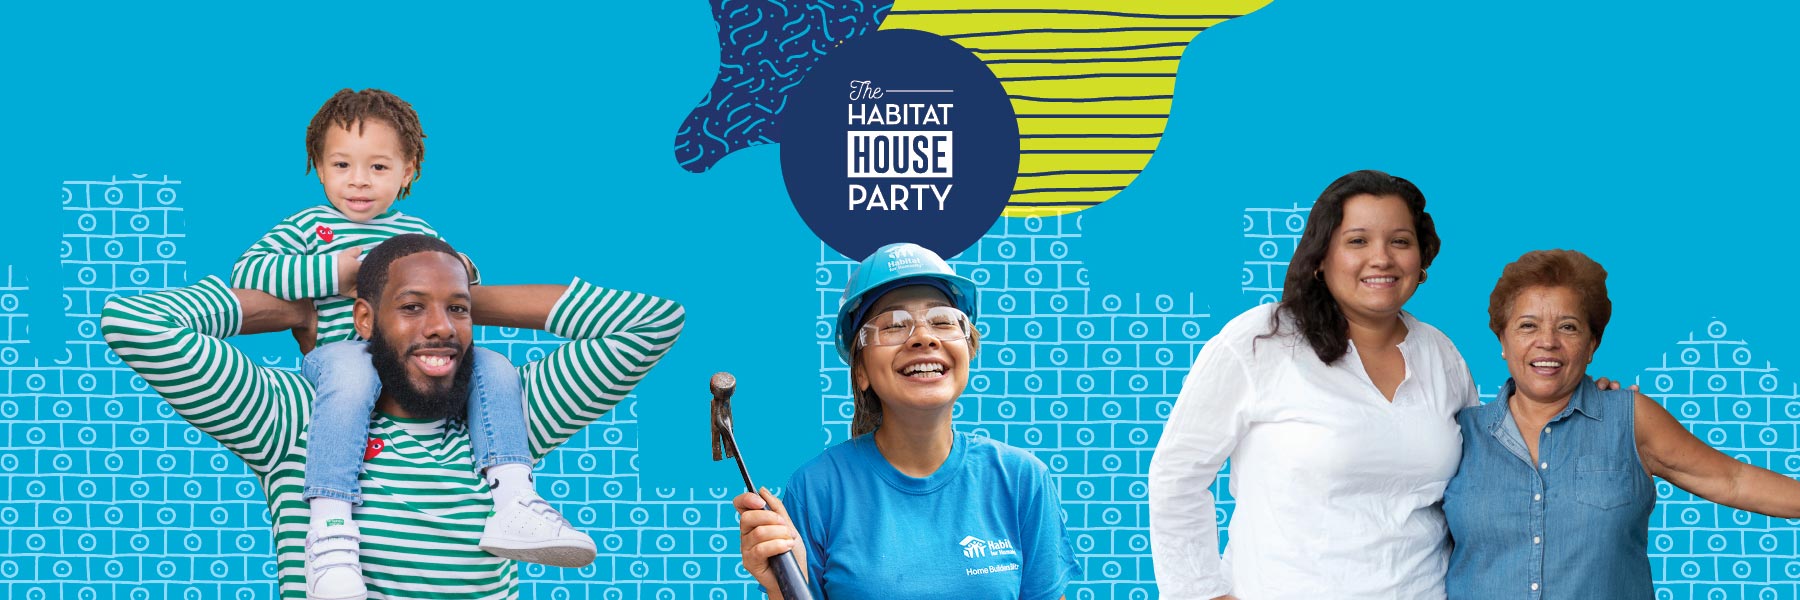 Graphic with 5 people standing by a logo for The Habitat House Party